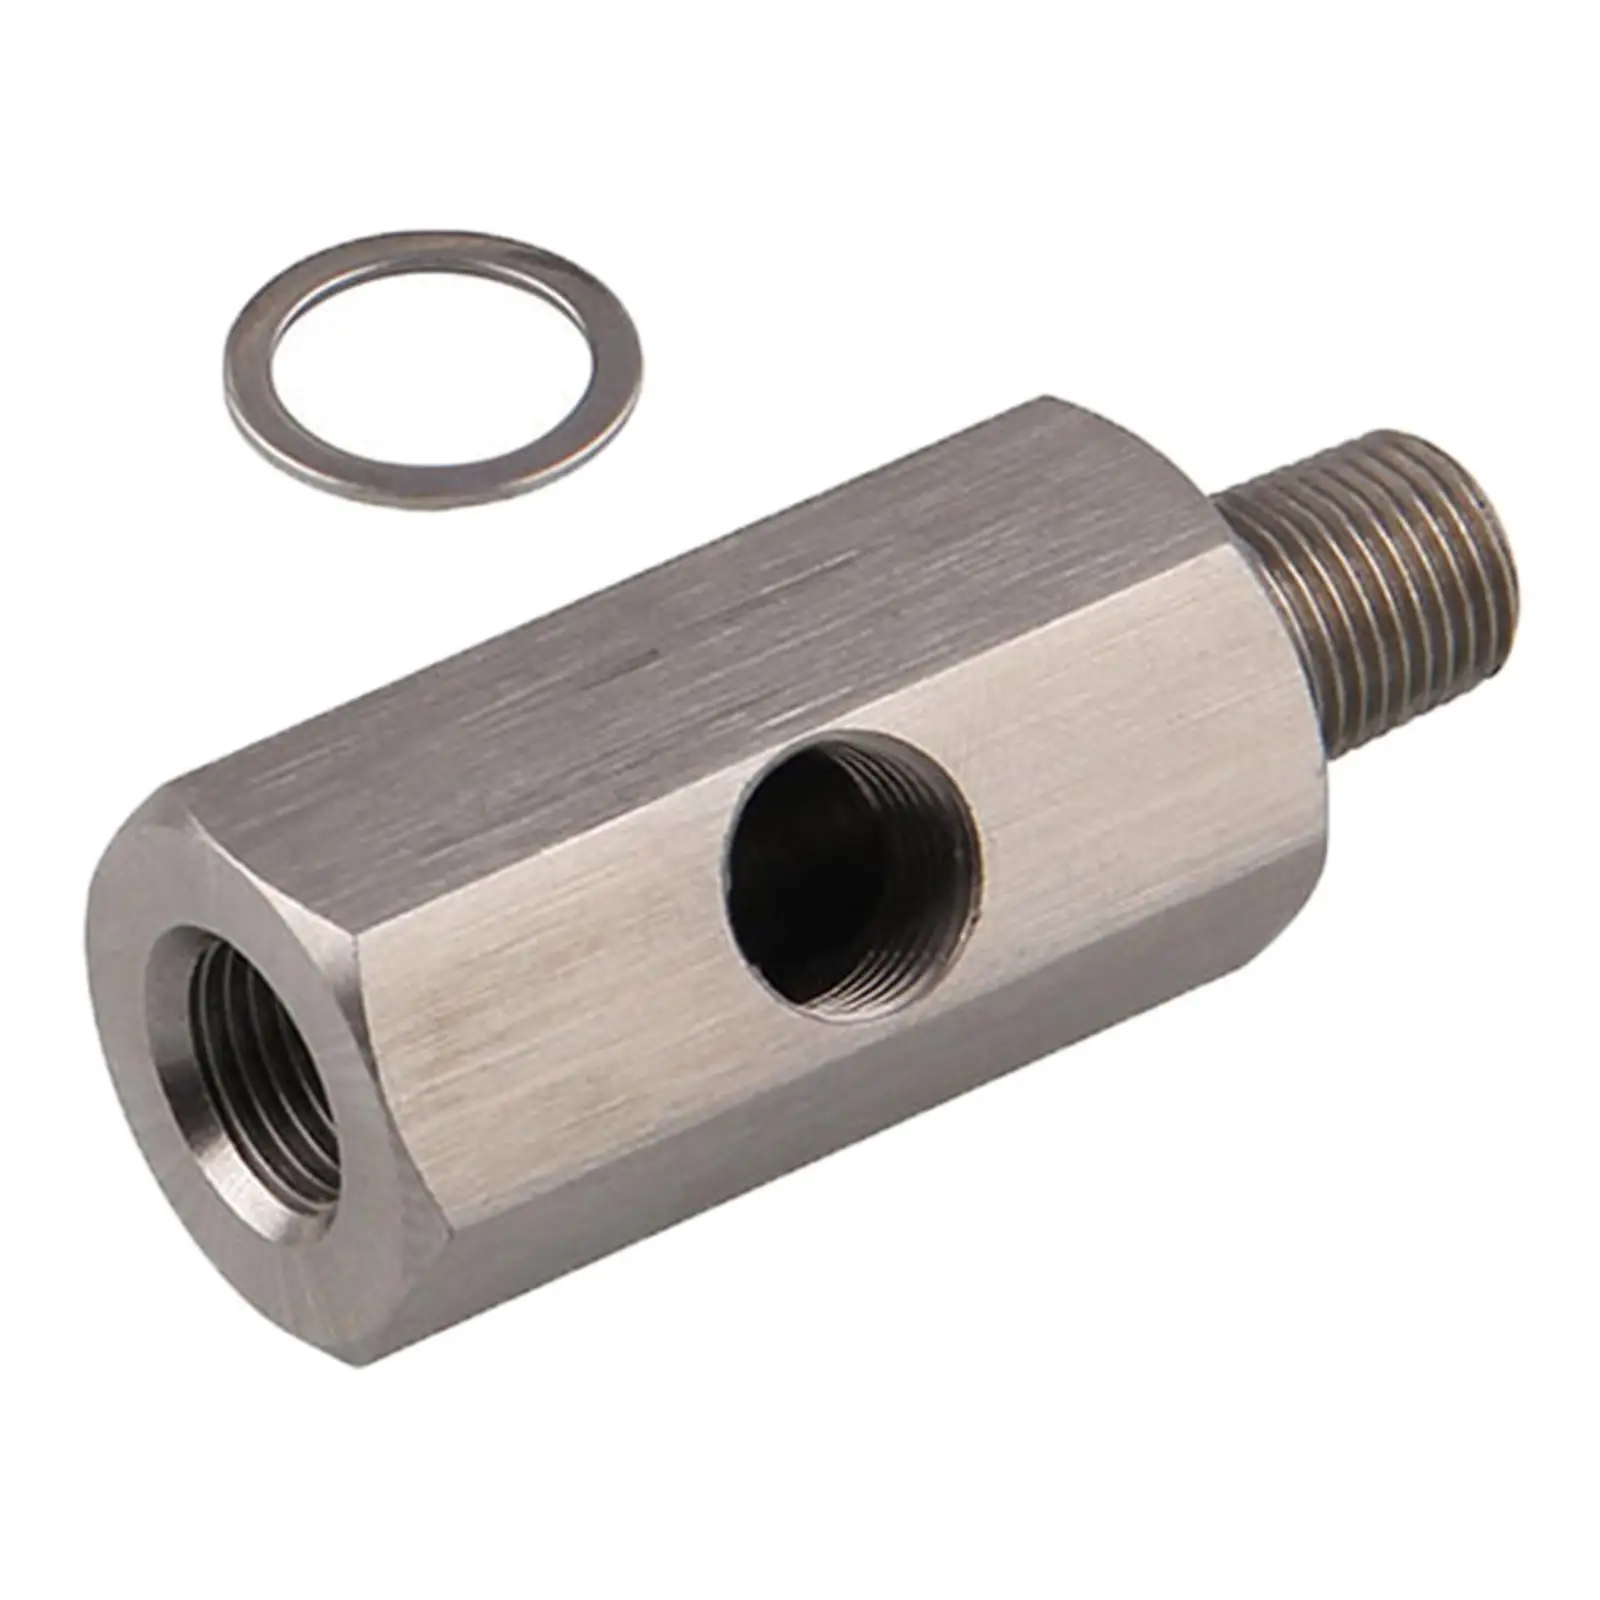 Automotive Oil Pressure Sensor  Adapter Fitting 1/8 inch NPT Stainless Steel Premium Material Durable feed Line  Replacement